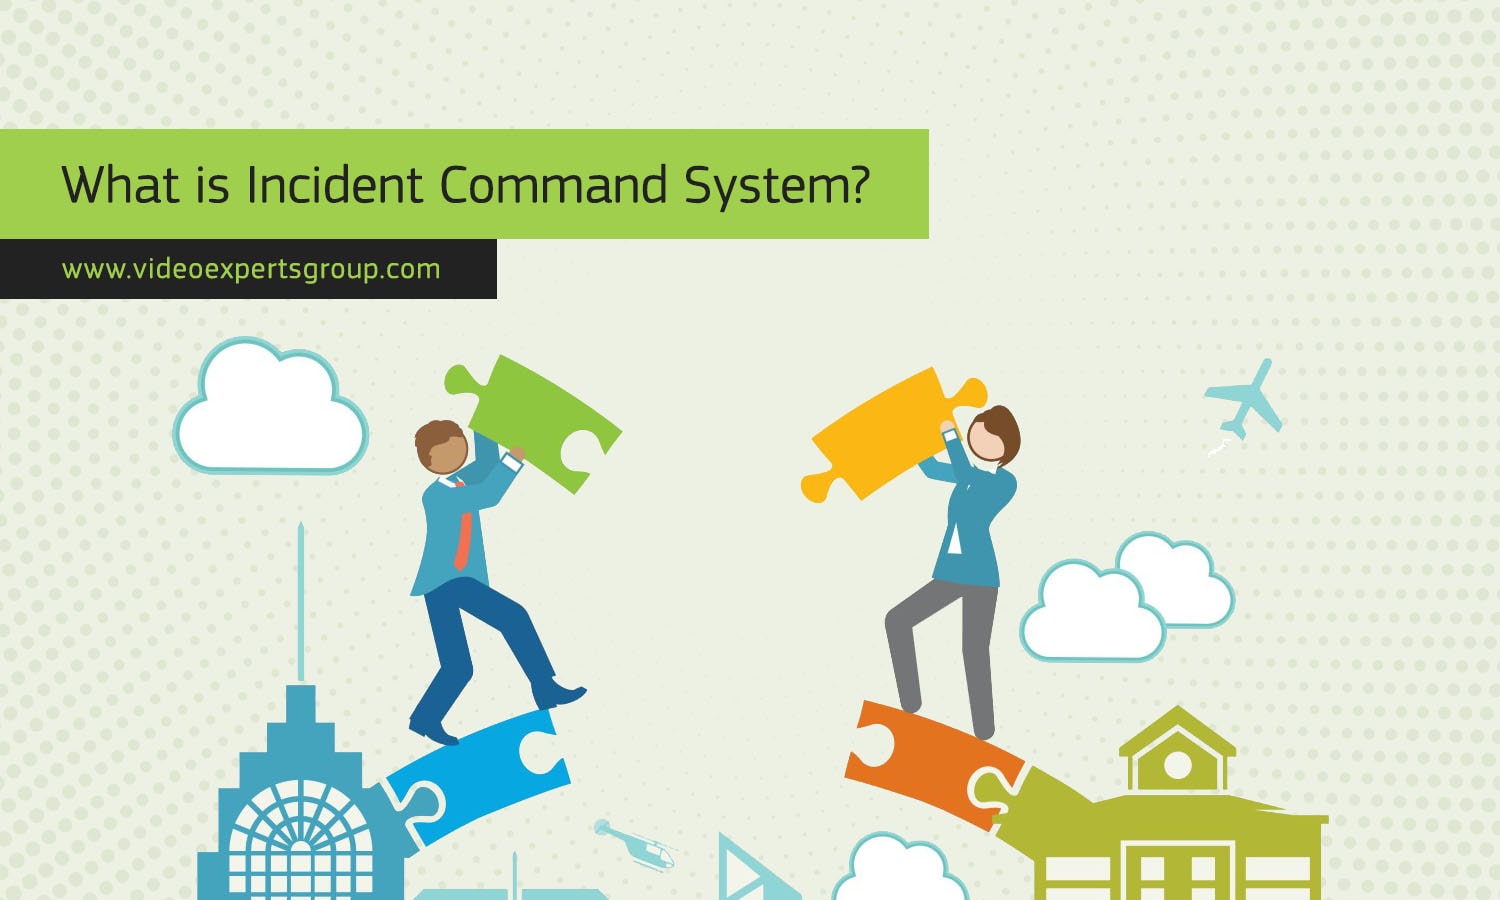 What is Incident Command System (ICS)?